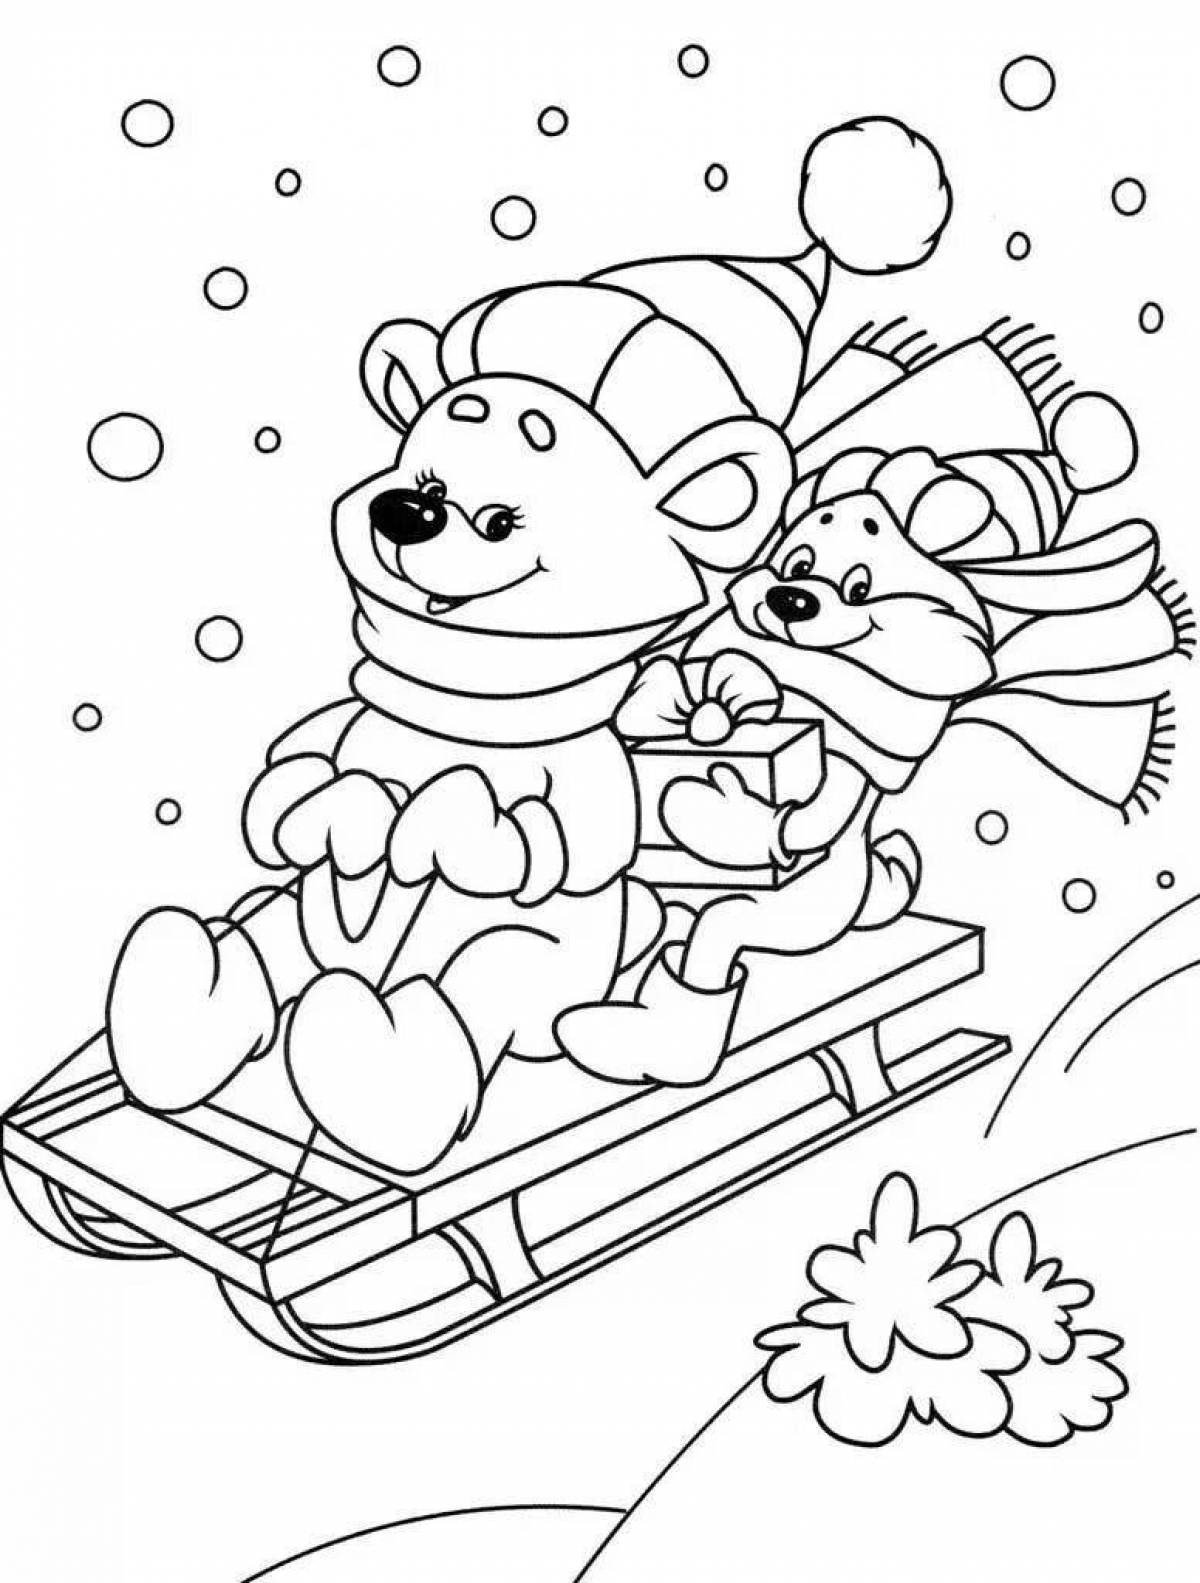 Colourful winter coloring book for children 6-7 years old